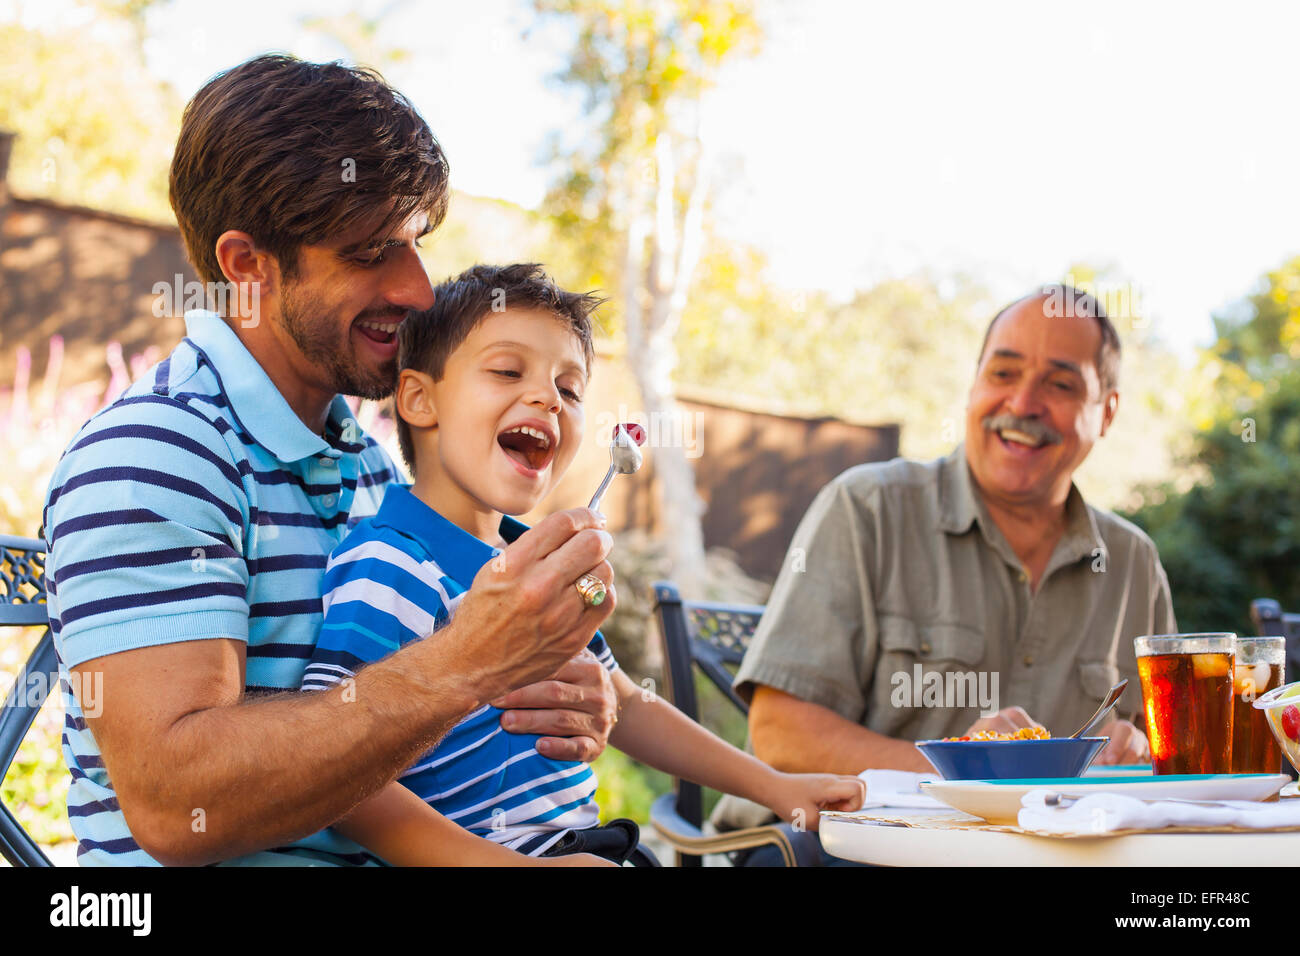 Father feeding son on lap, grandfather in background Stock Photo